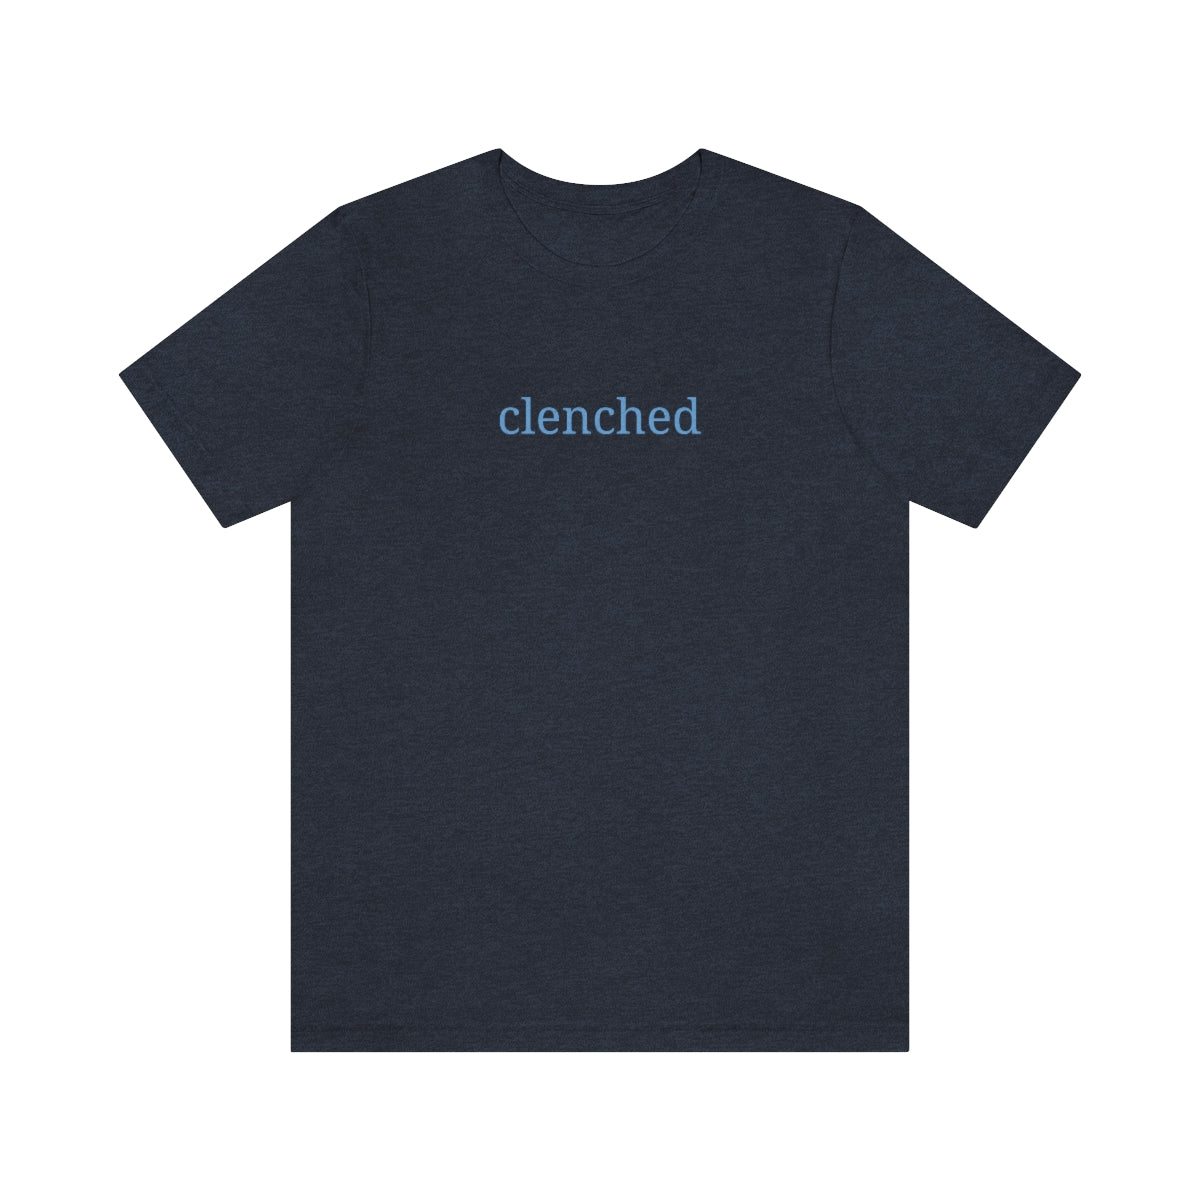 Clenched (unisex)